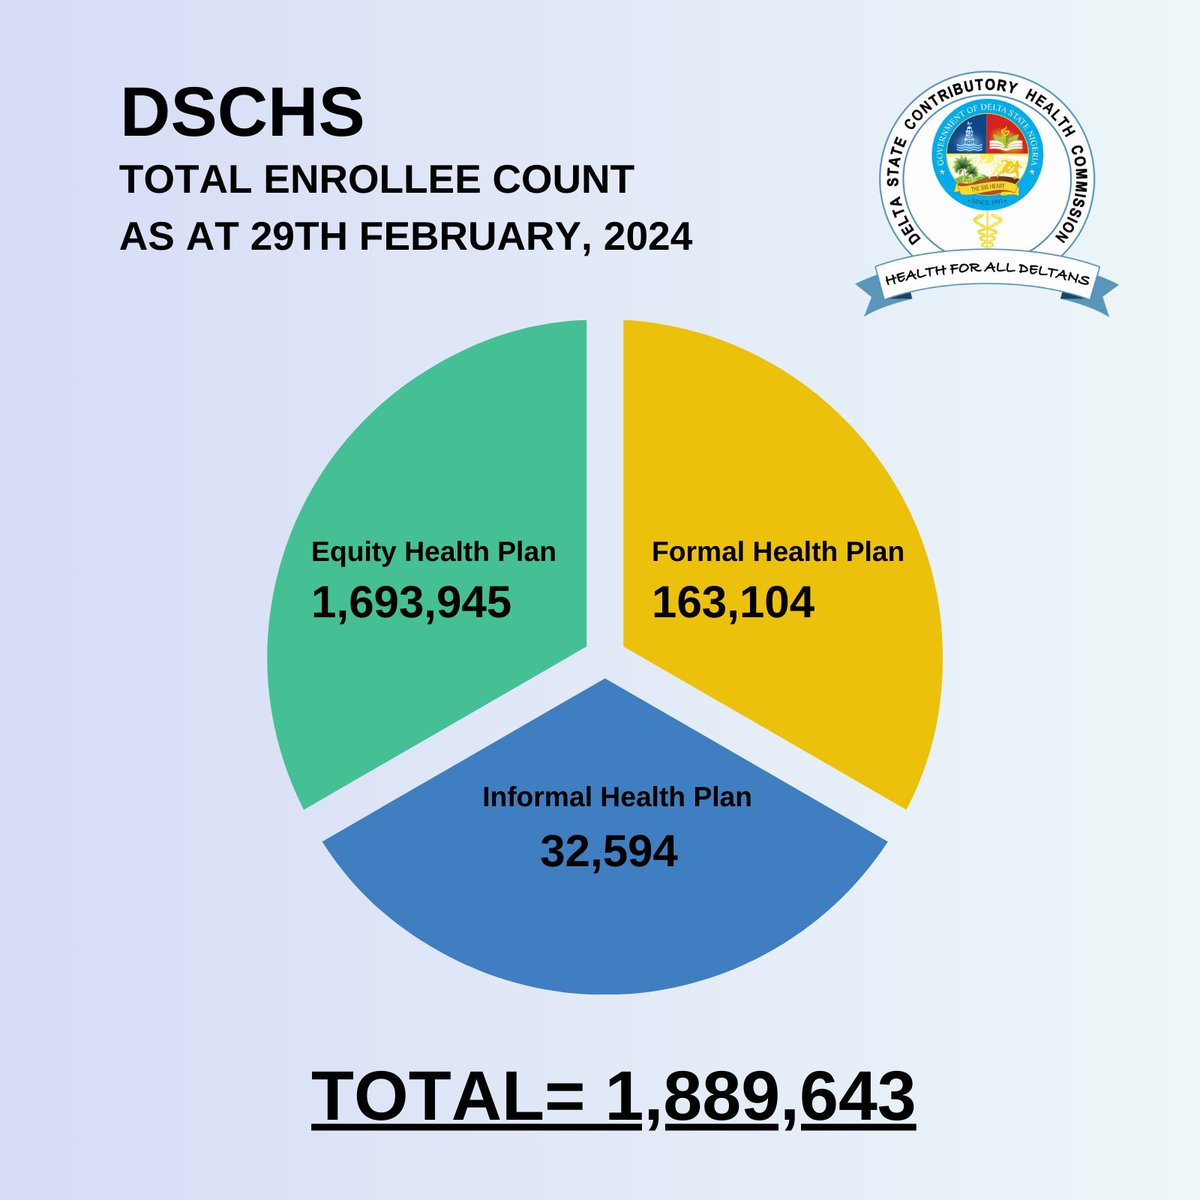 In Delta State we have the Delta State Contributory Health Commission(DSCHC). The DSCHC commenced service under the scheme on the 1st of January, 2017, and currently has provided service to 1,889,643 Enrollees in 7 years.